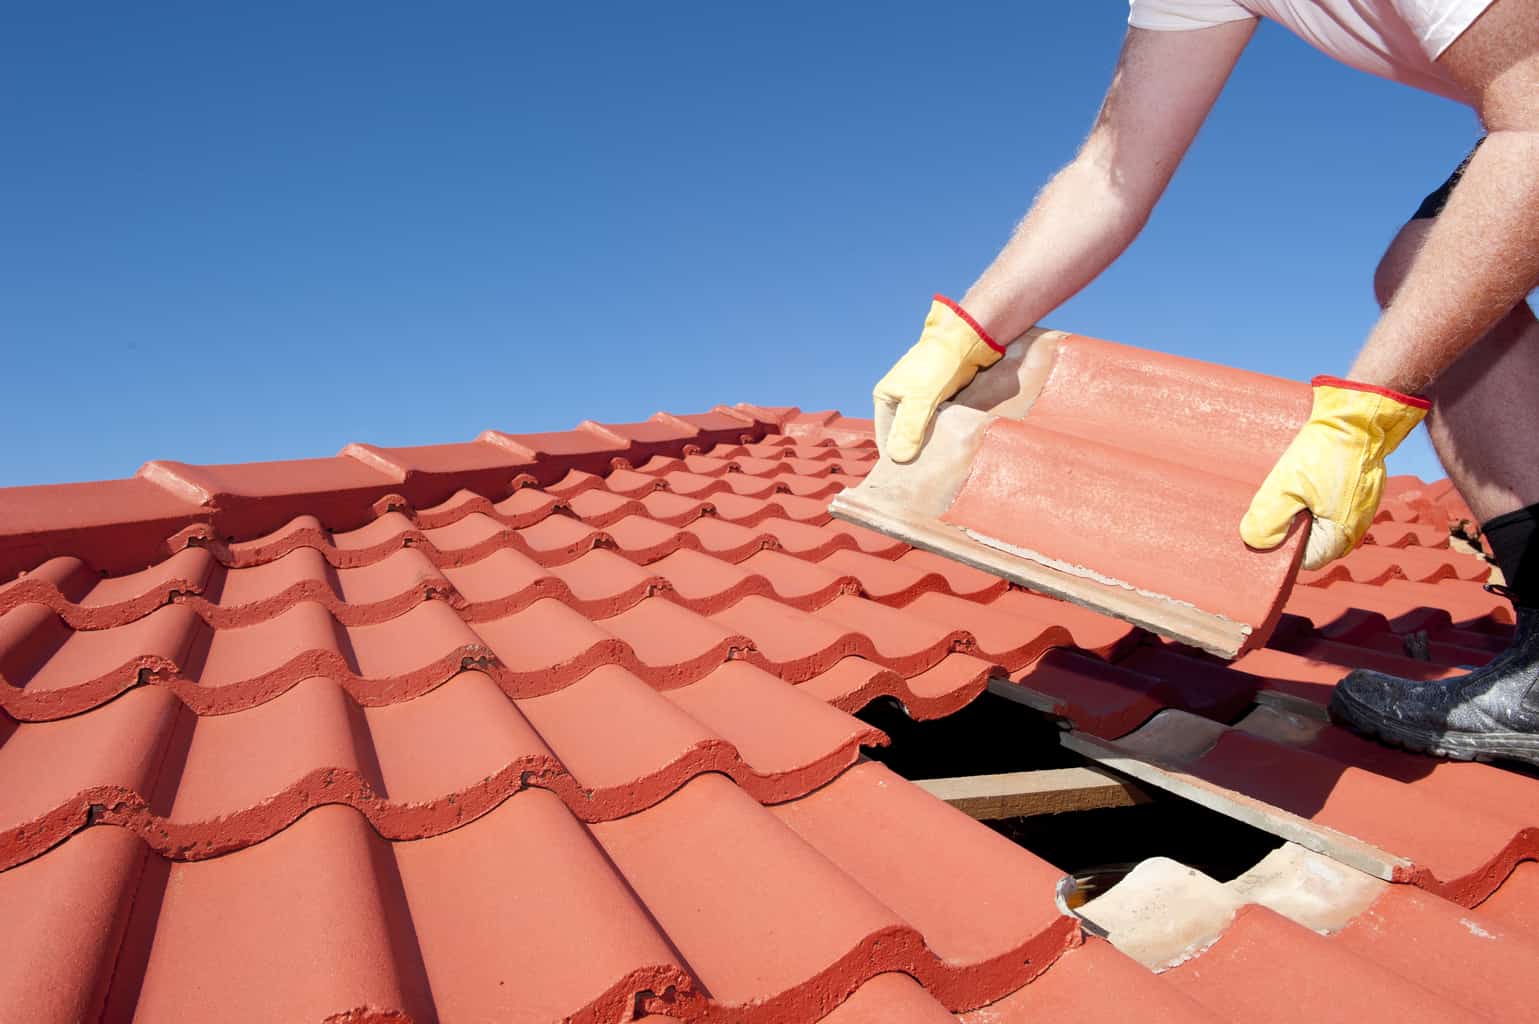 10 Roofing Materials Commonly Used in Buildings